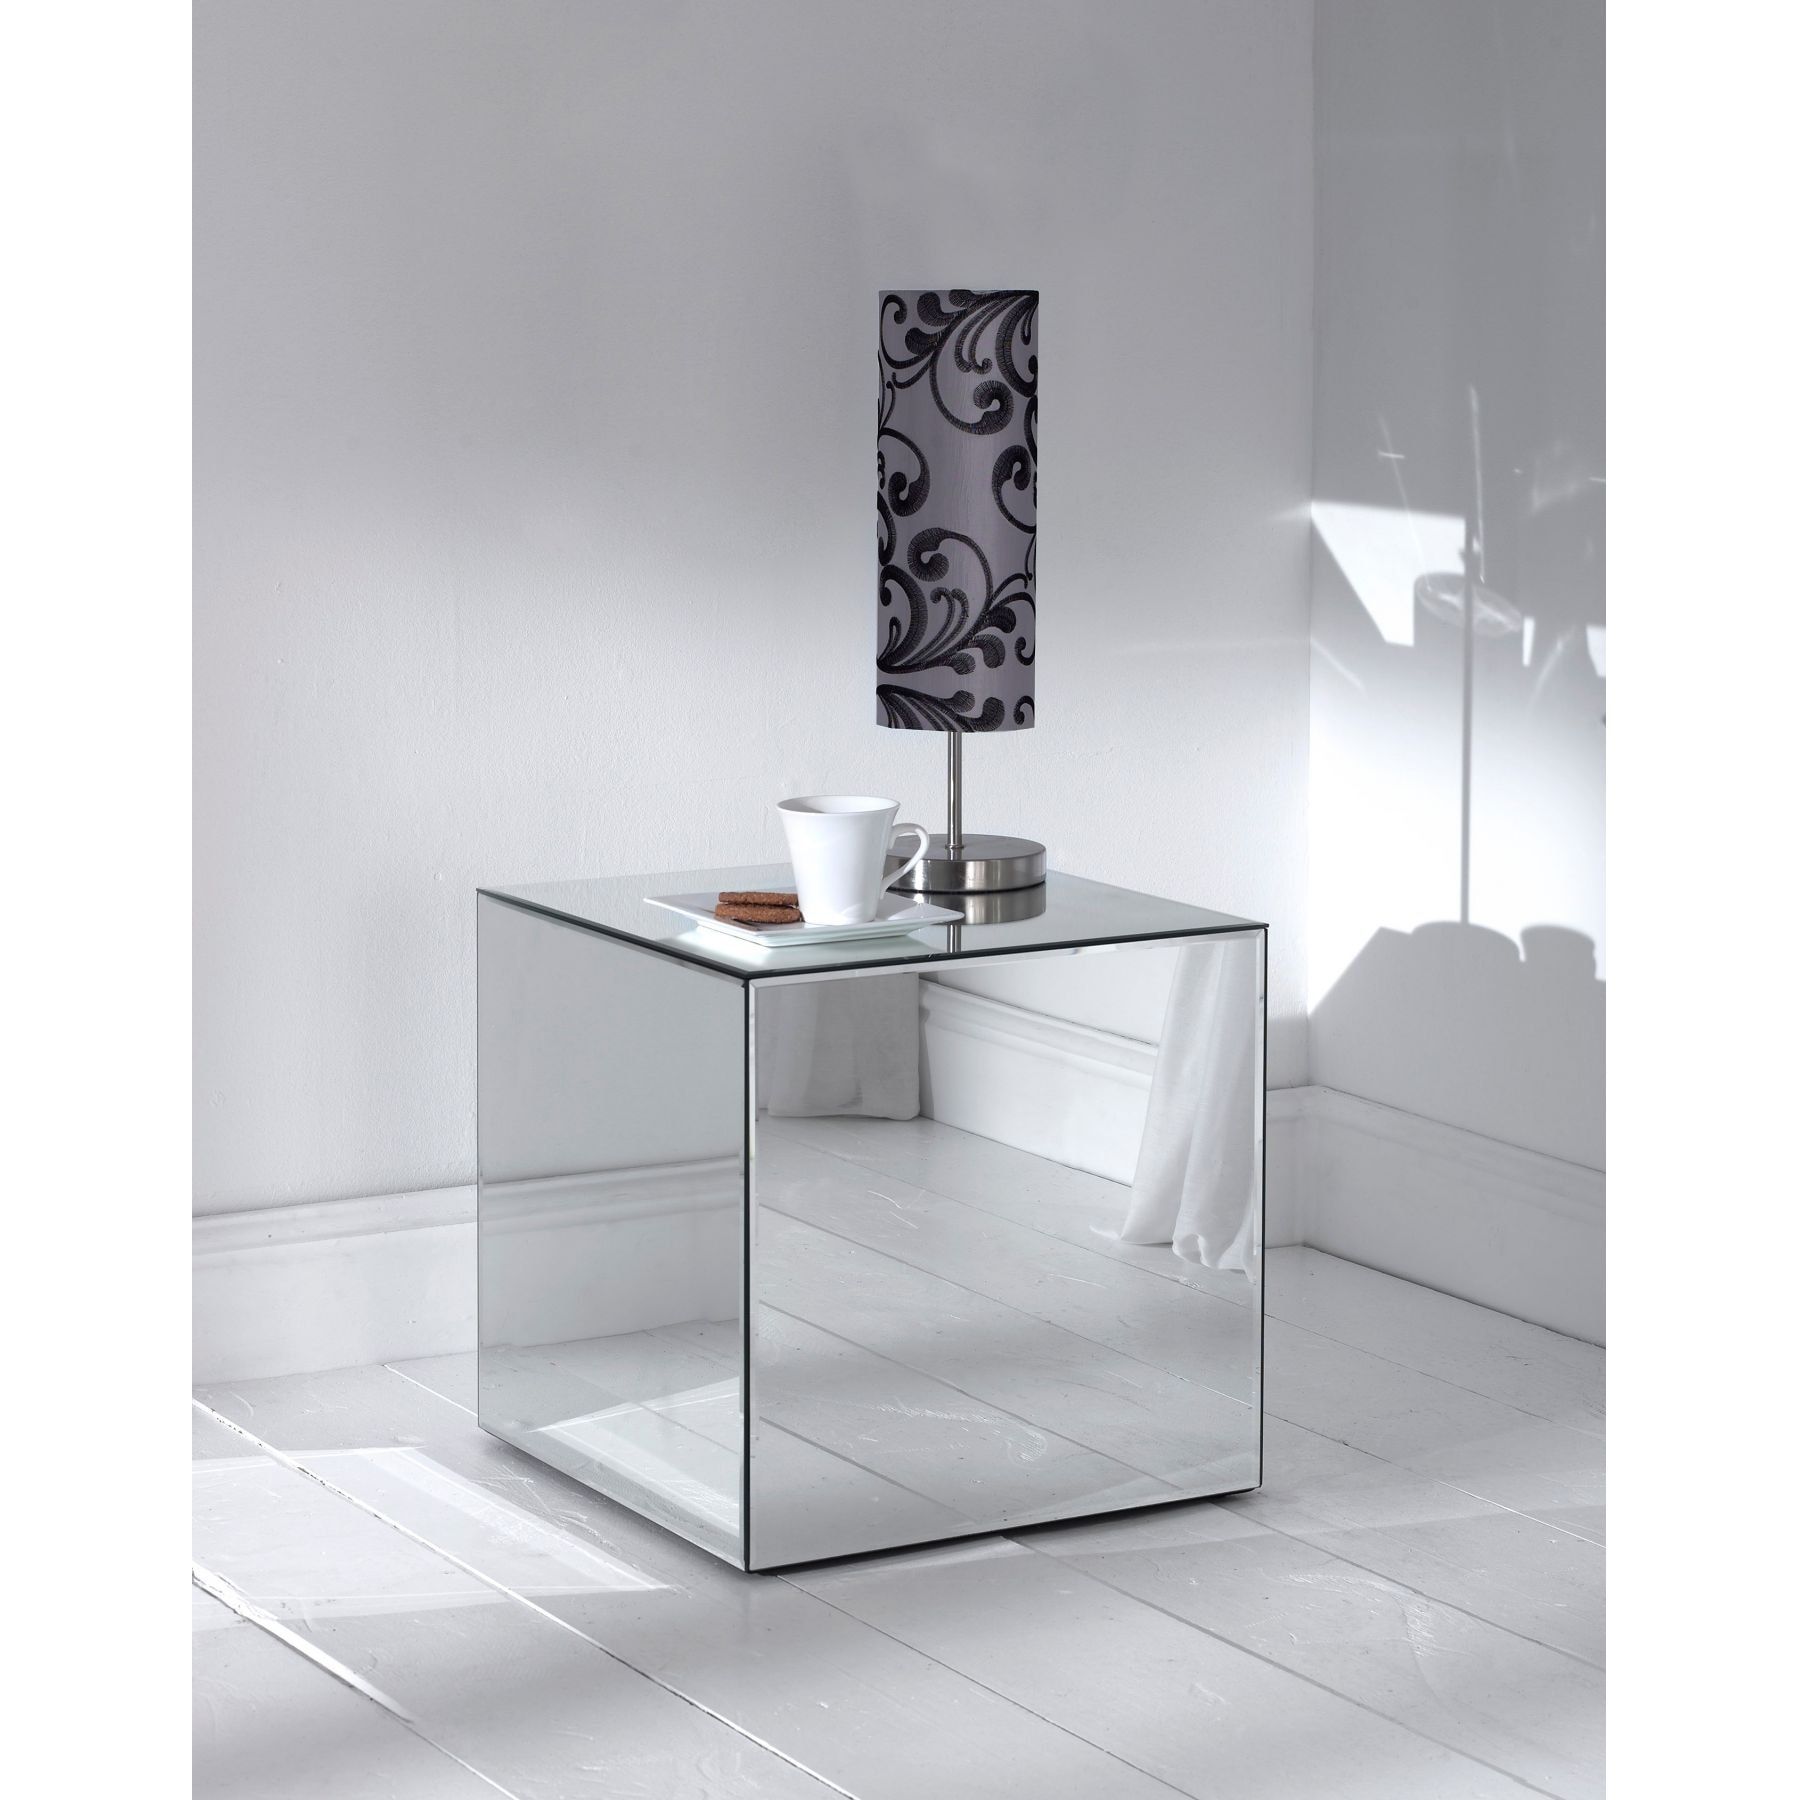 Mirrored Cube – Mirrored Furniture From Homesdirect 365 Uk Pertaining To Gold And Mirror Modern Cube Console Tables (View 20 of 20)